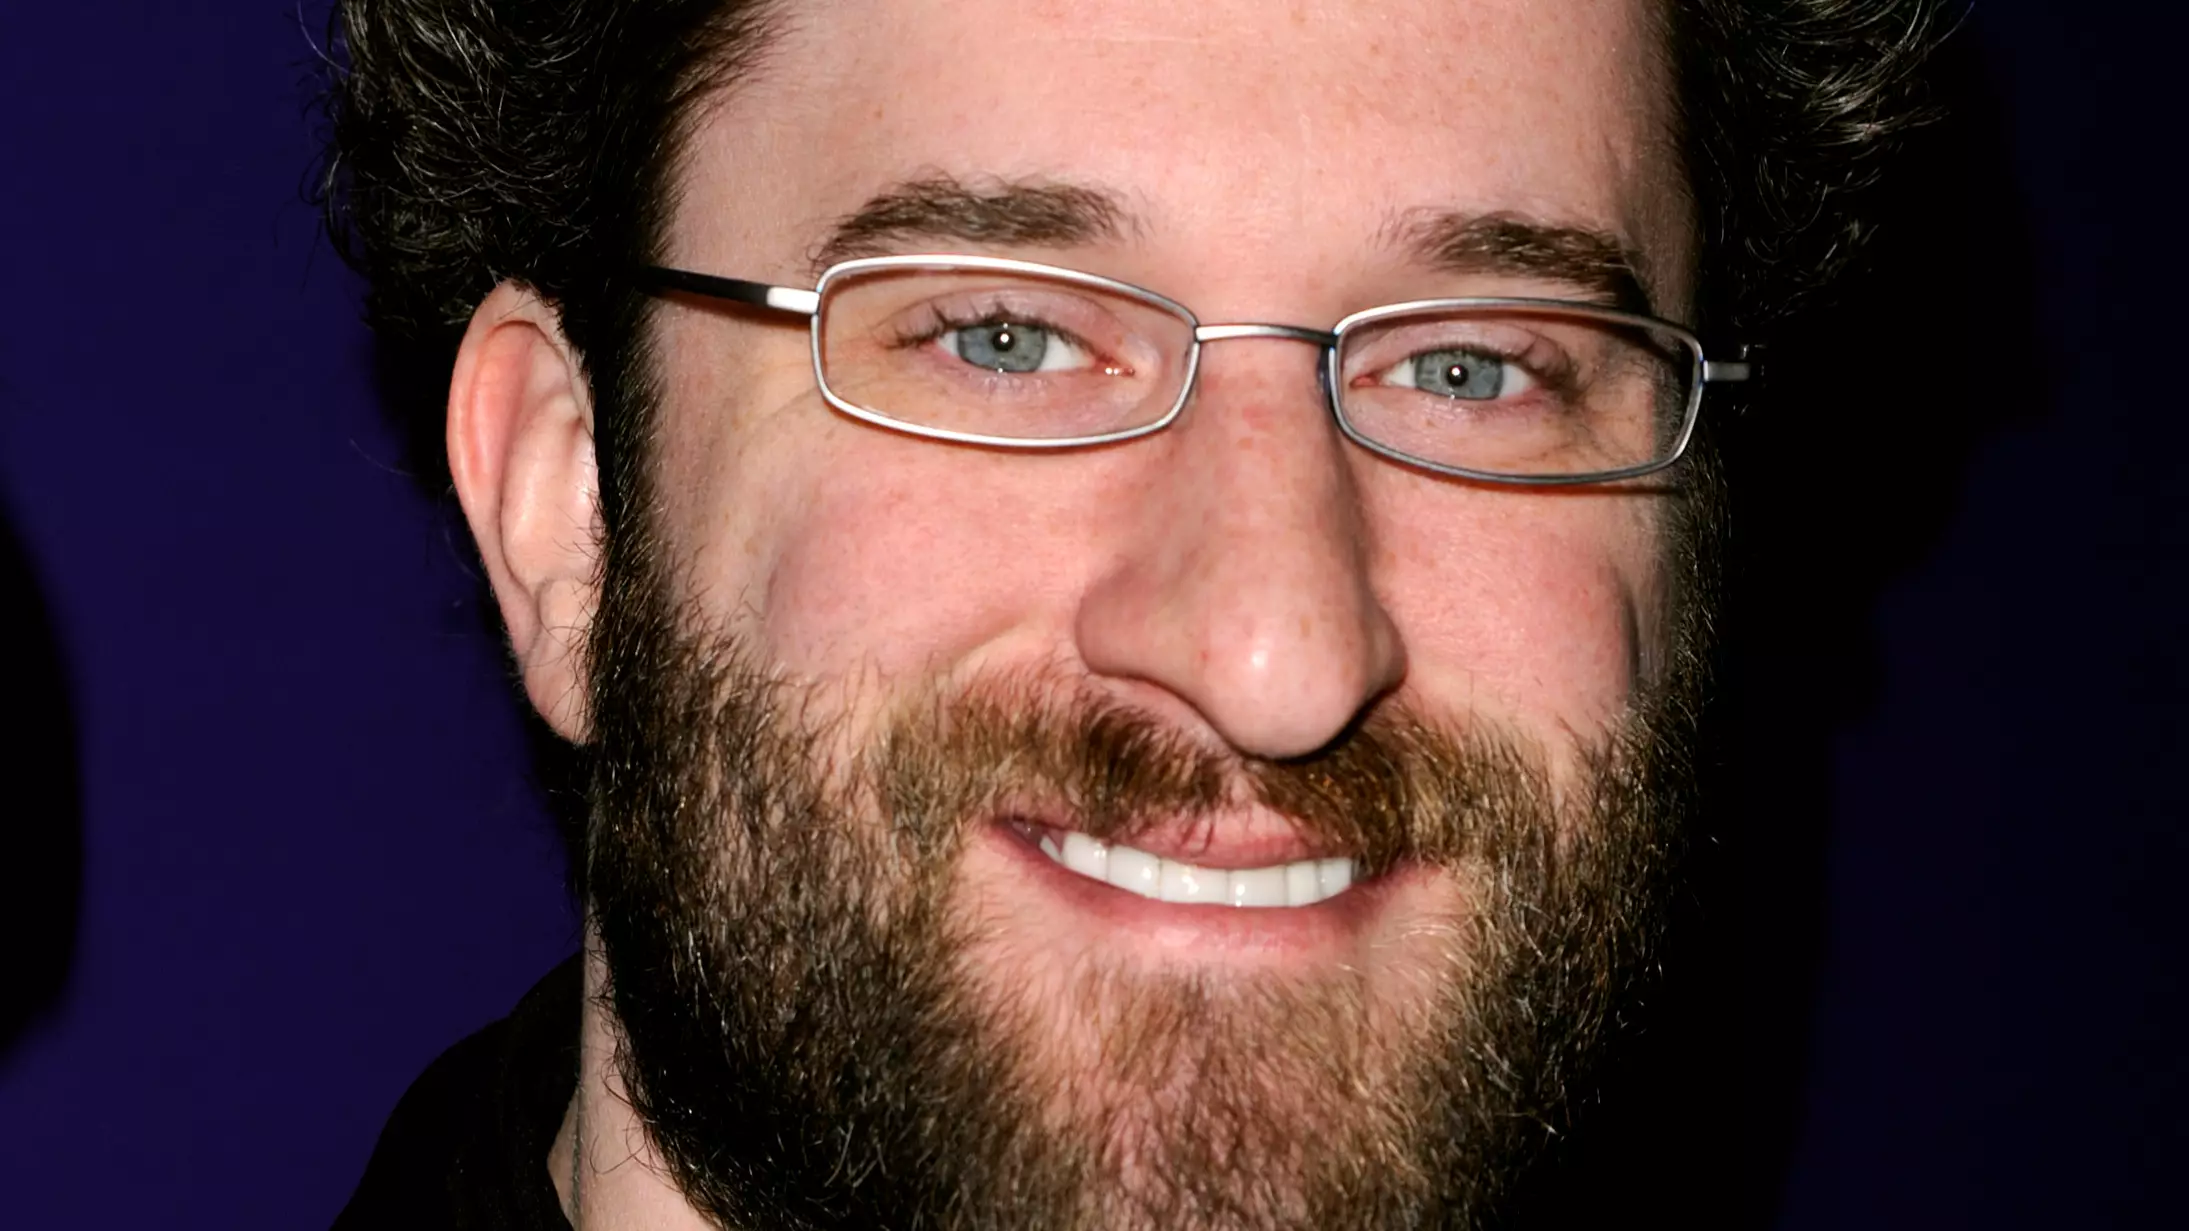 Saved By The Bell's Dustin Diamond Has Died After Battle With Stage 4 Lung Cancer